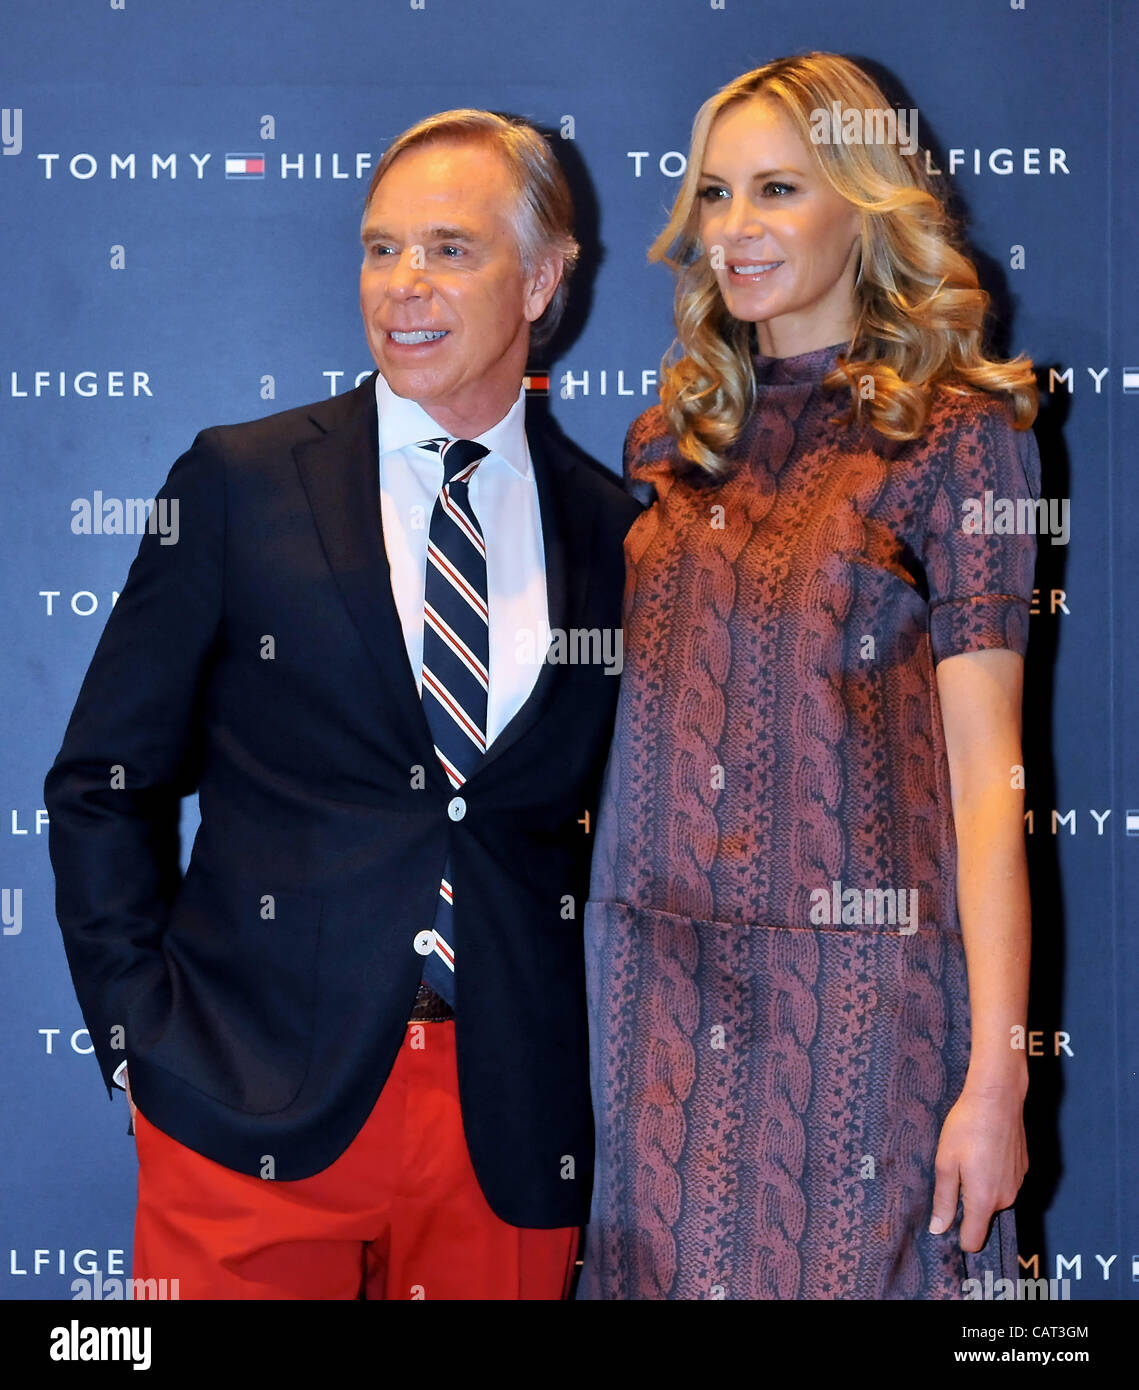 Tommy Hilfiger, Dee Hilfiger, Apr 16, 2012 : Fashion designer Tommy Hilfiger(L)  and his wife Dee Hilfiger attend the Tommy Hilfiger Omotesando Flagship  Store opening in Tokyo, Japan, on April 16, 2012 Stock Photo - Alamy